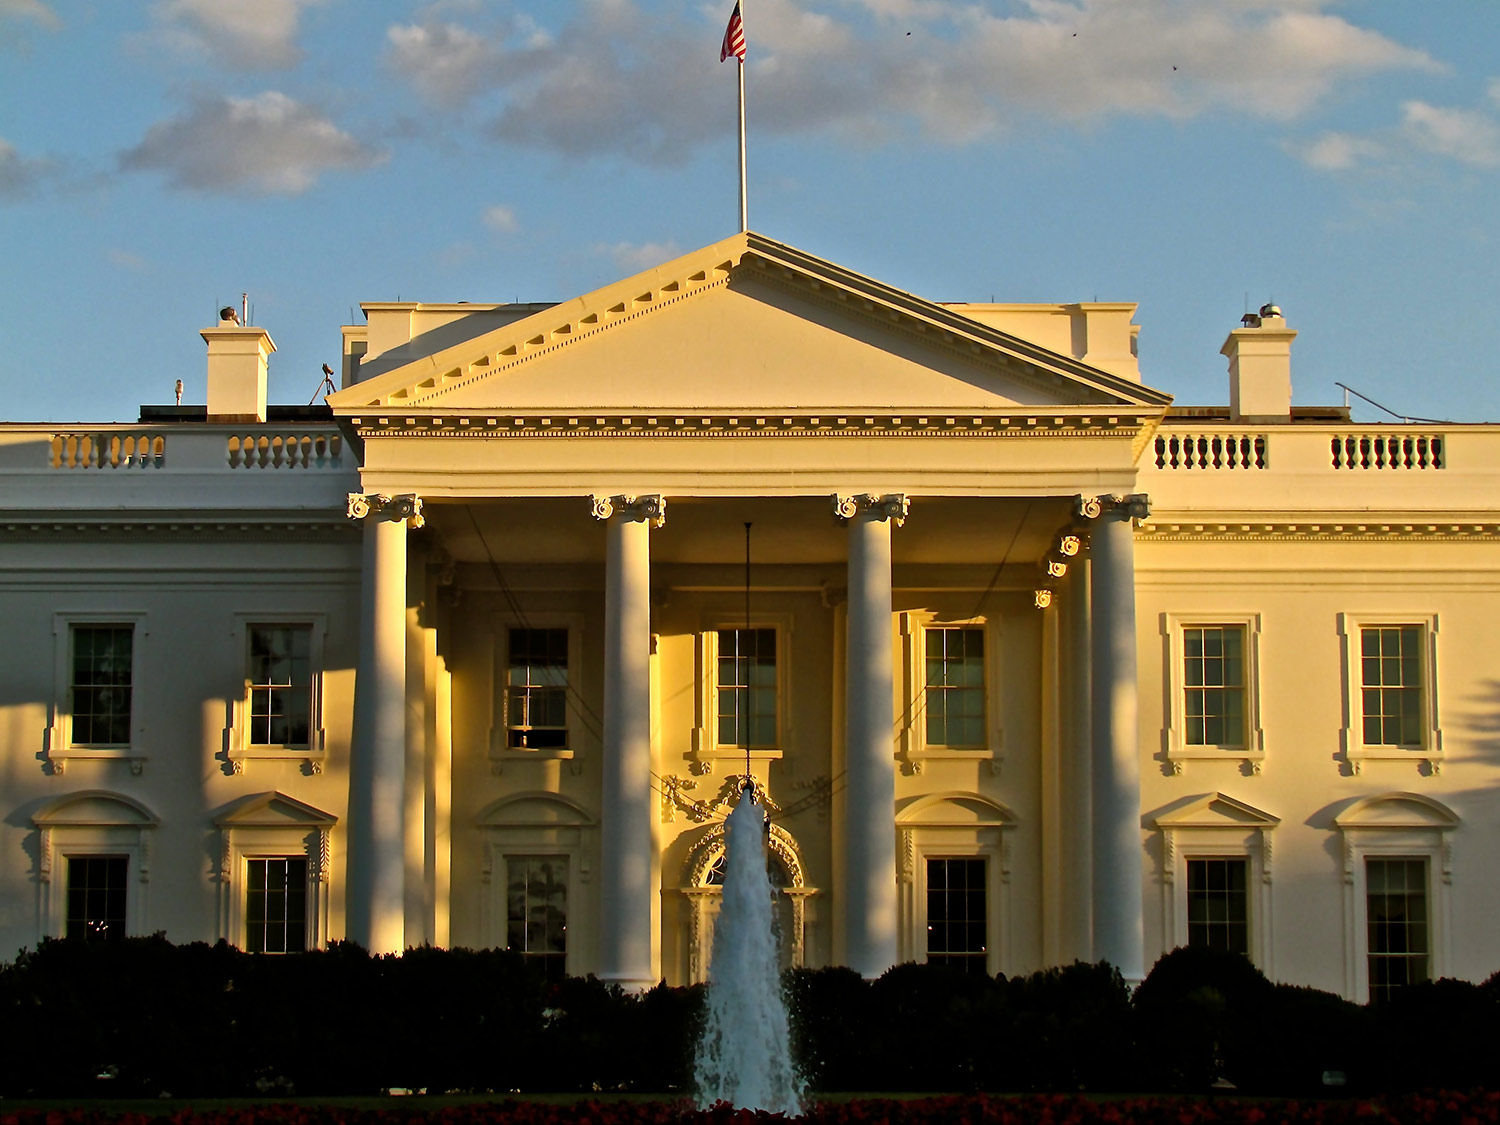 The north facade of the White House at sunrise.